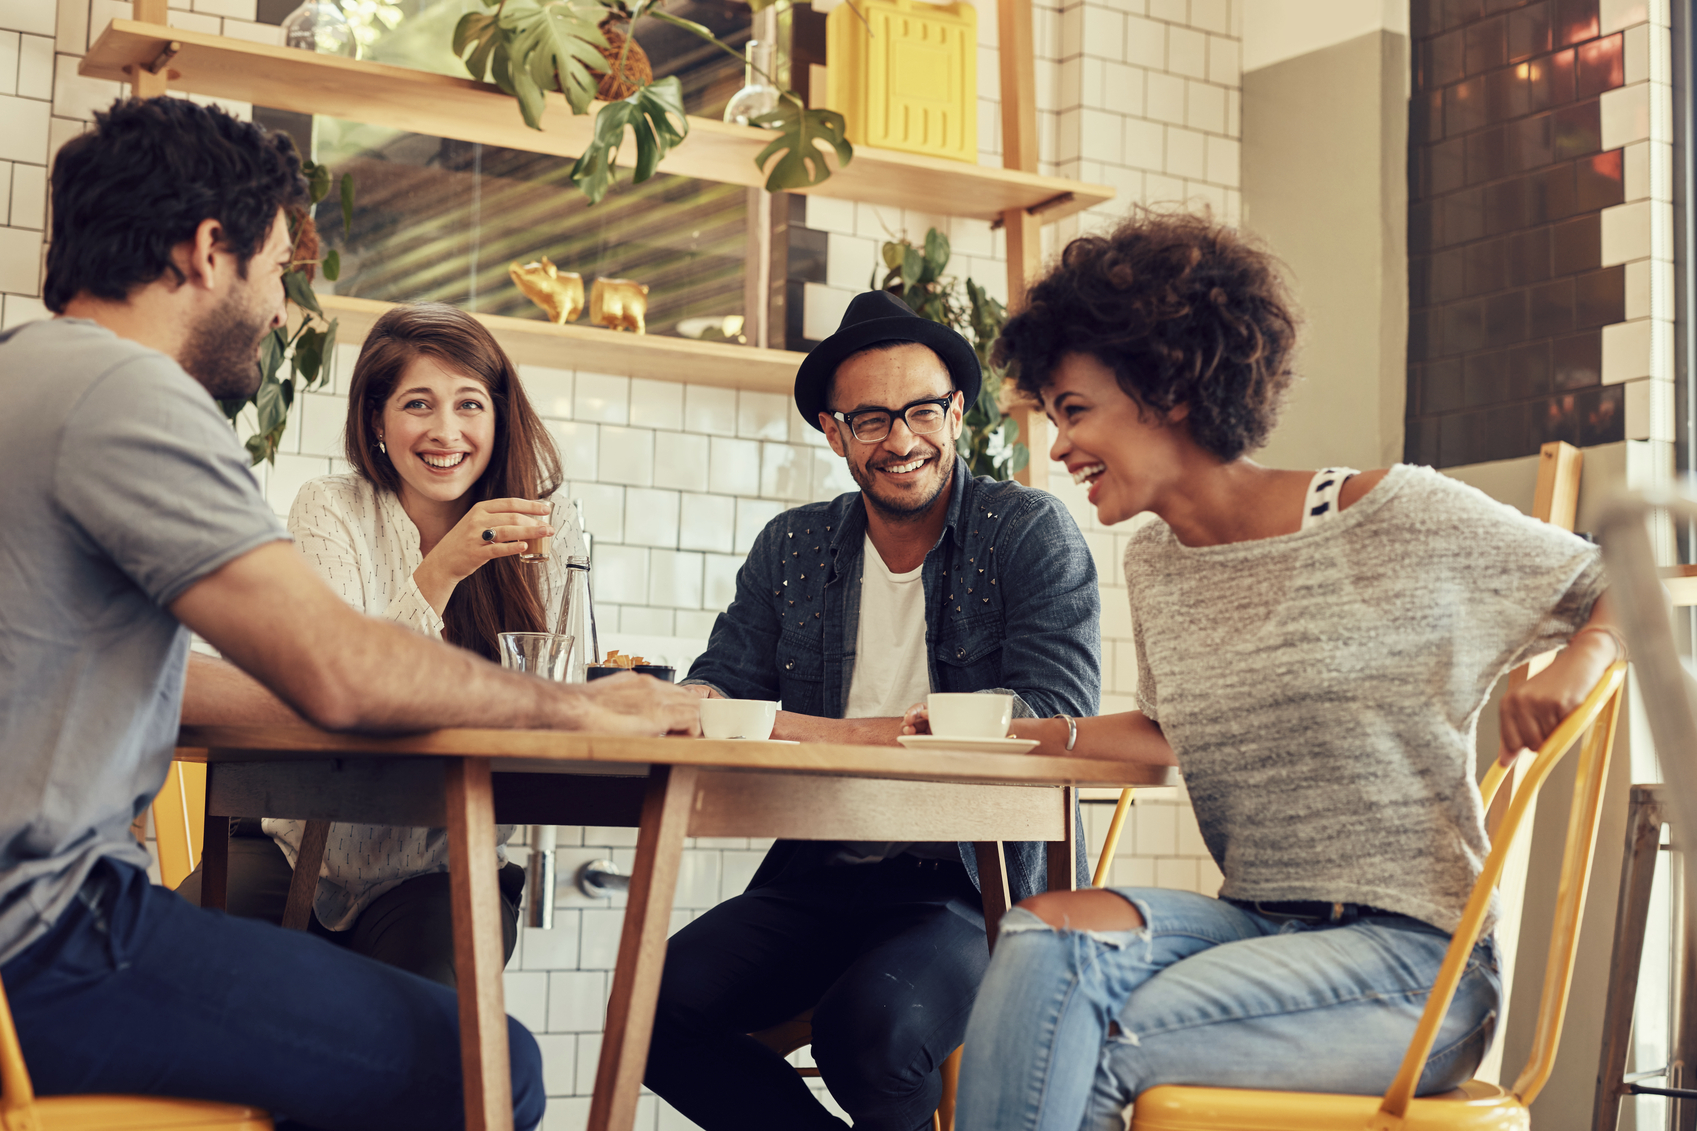 4 Ways To Build A Community Of Friends In A New Place